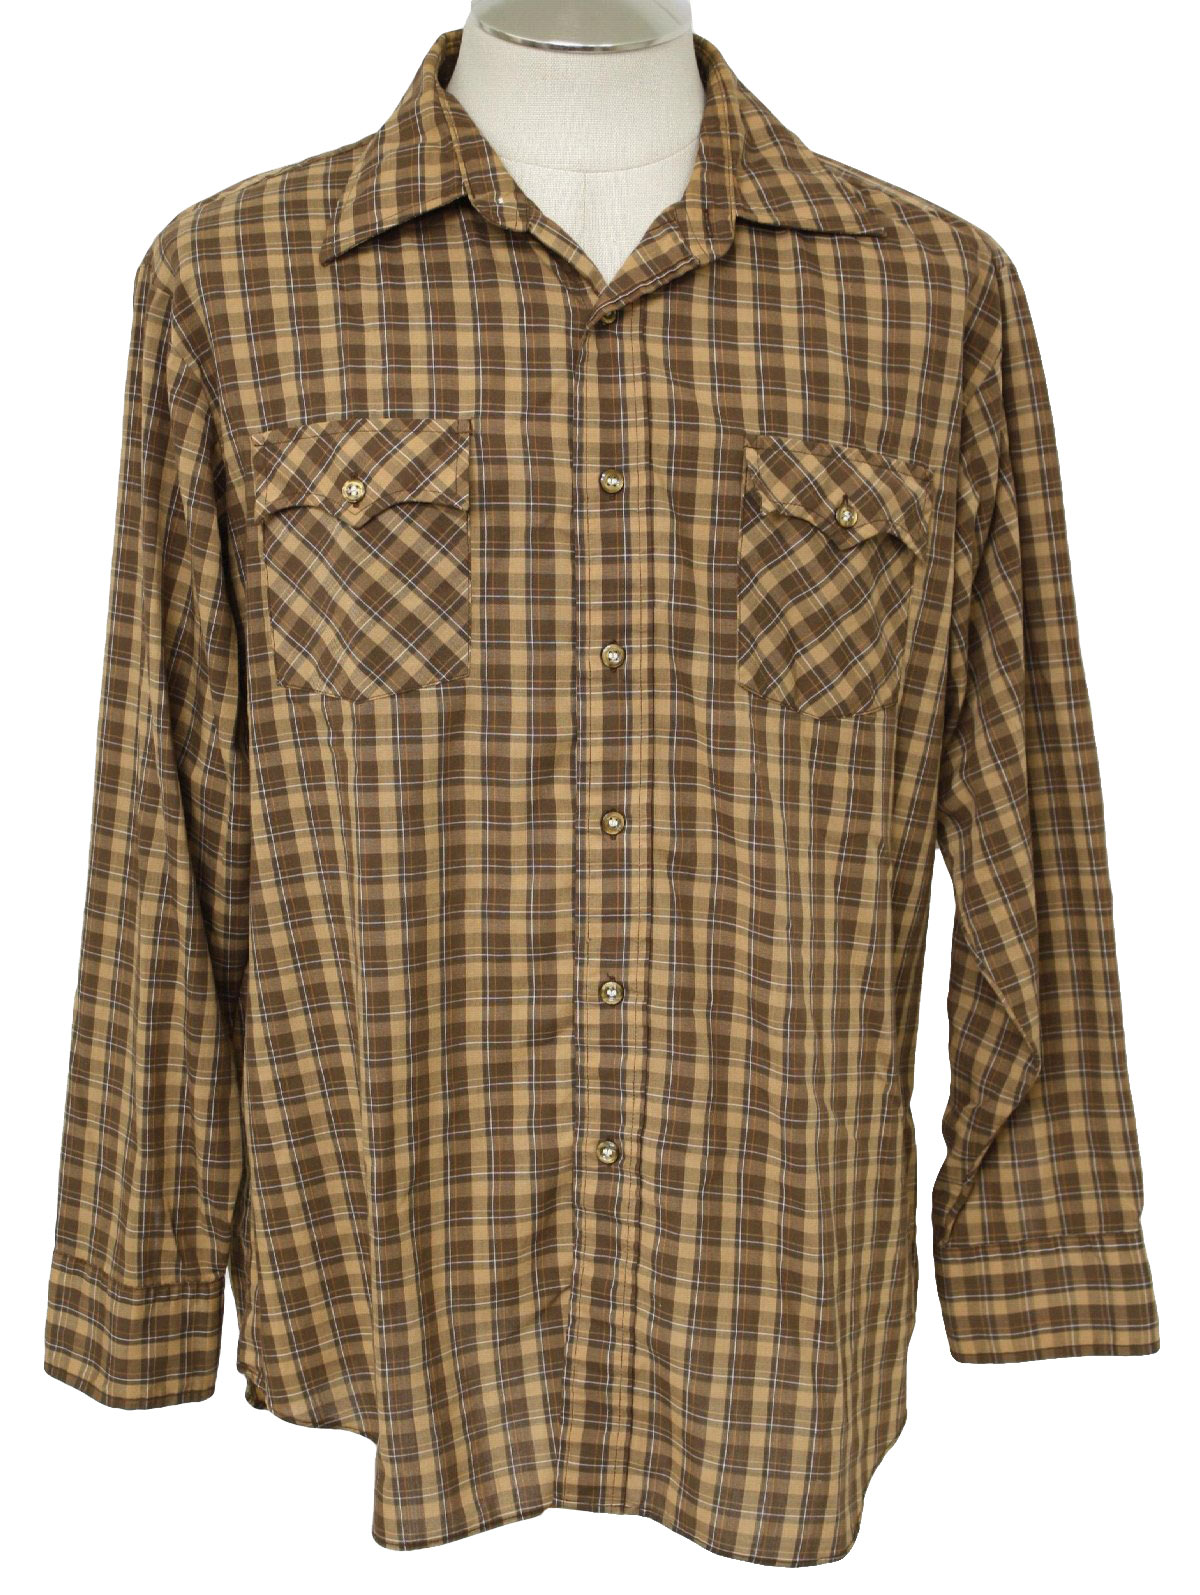 Retro 70's Western Shirt: 70s -Kingsport- Mens browns, green, white and ...